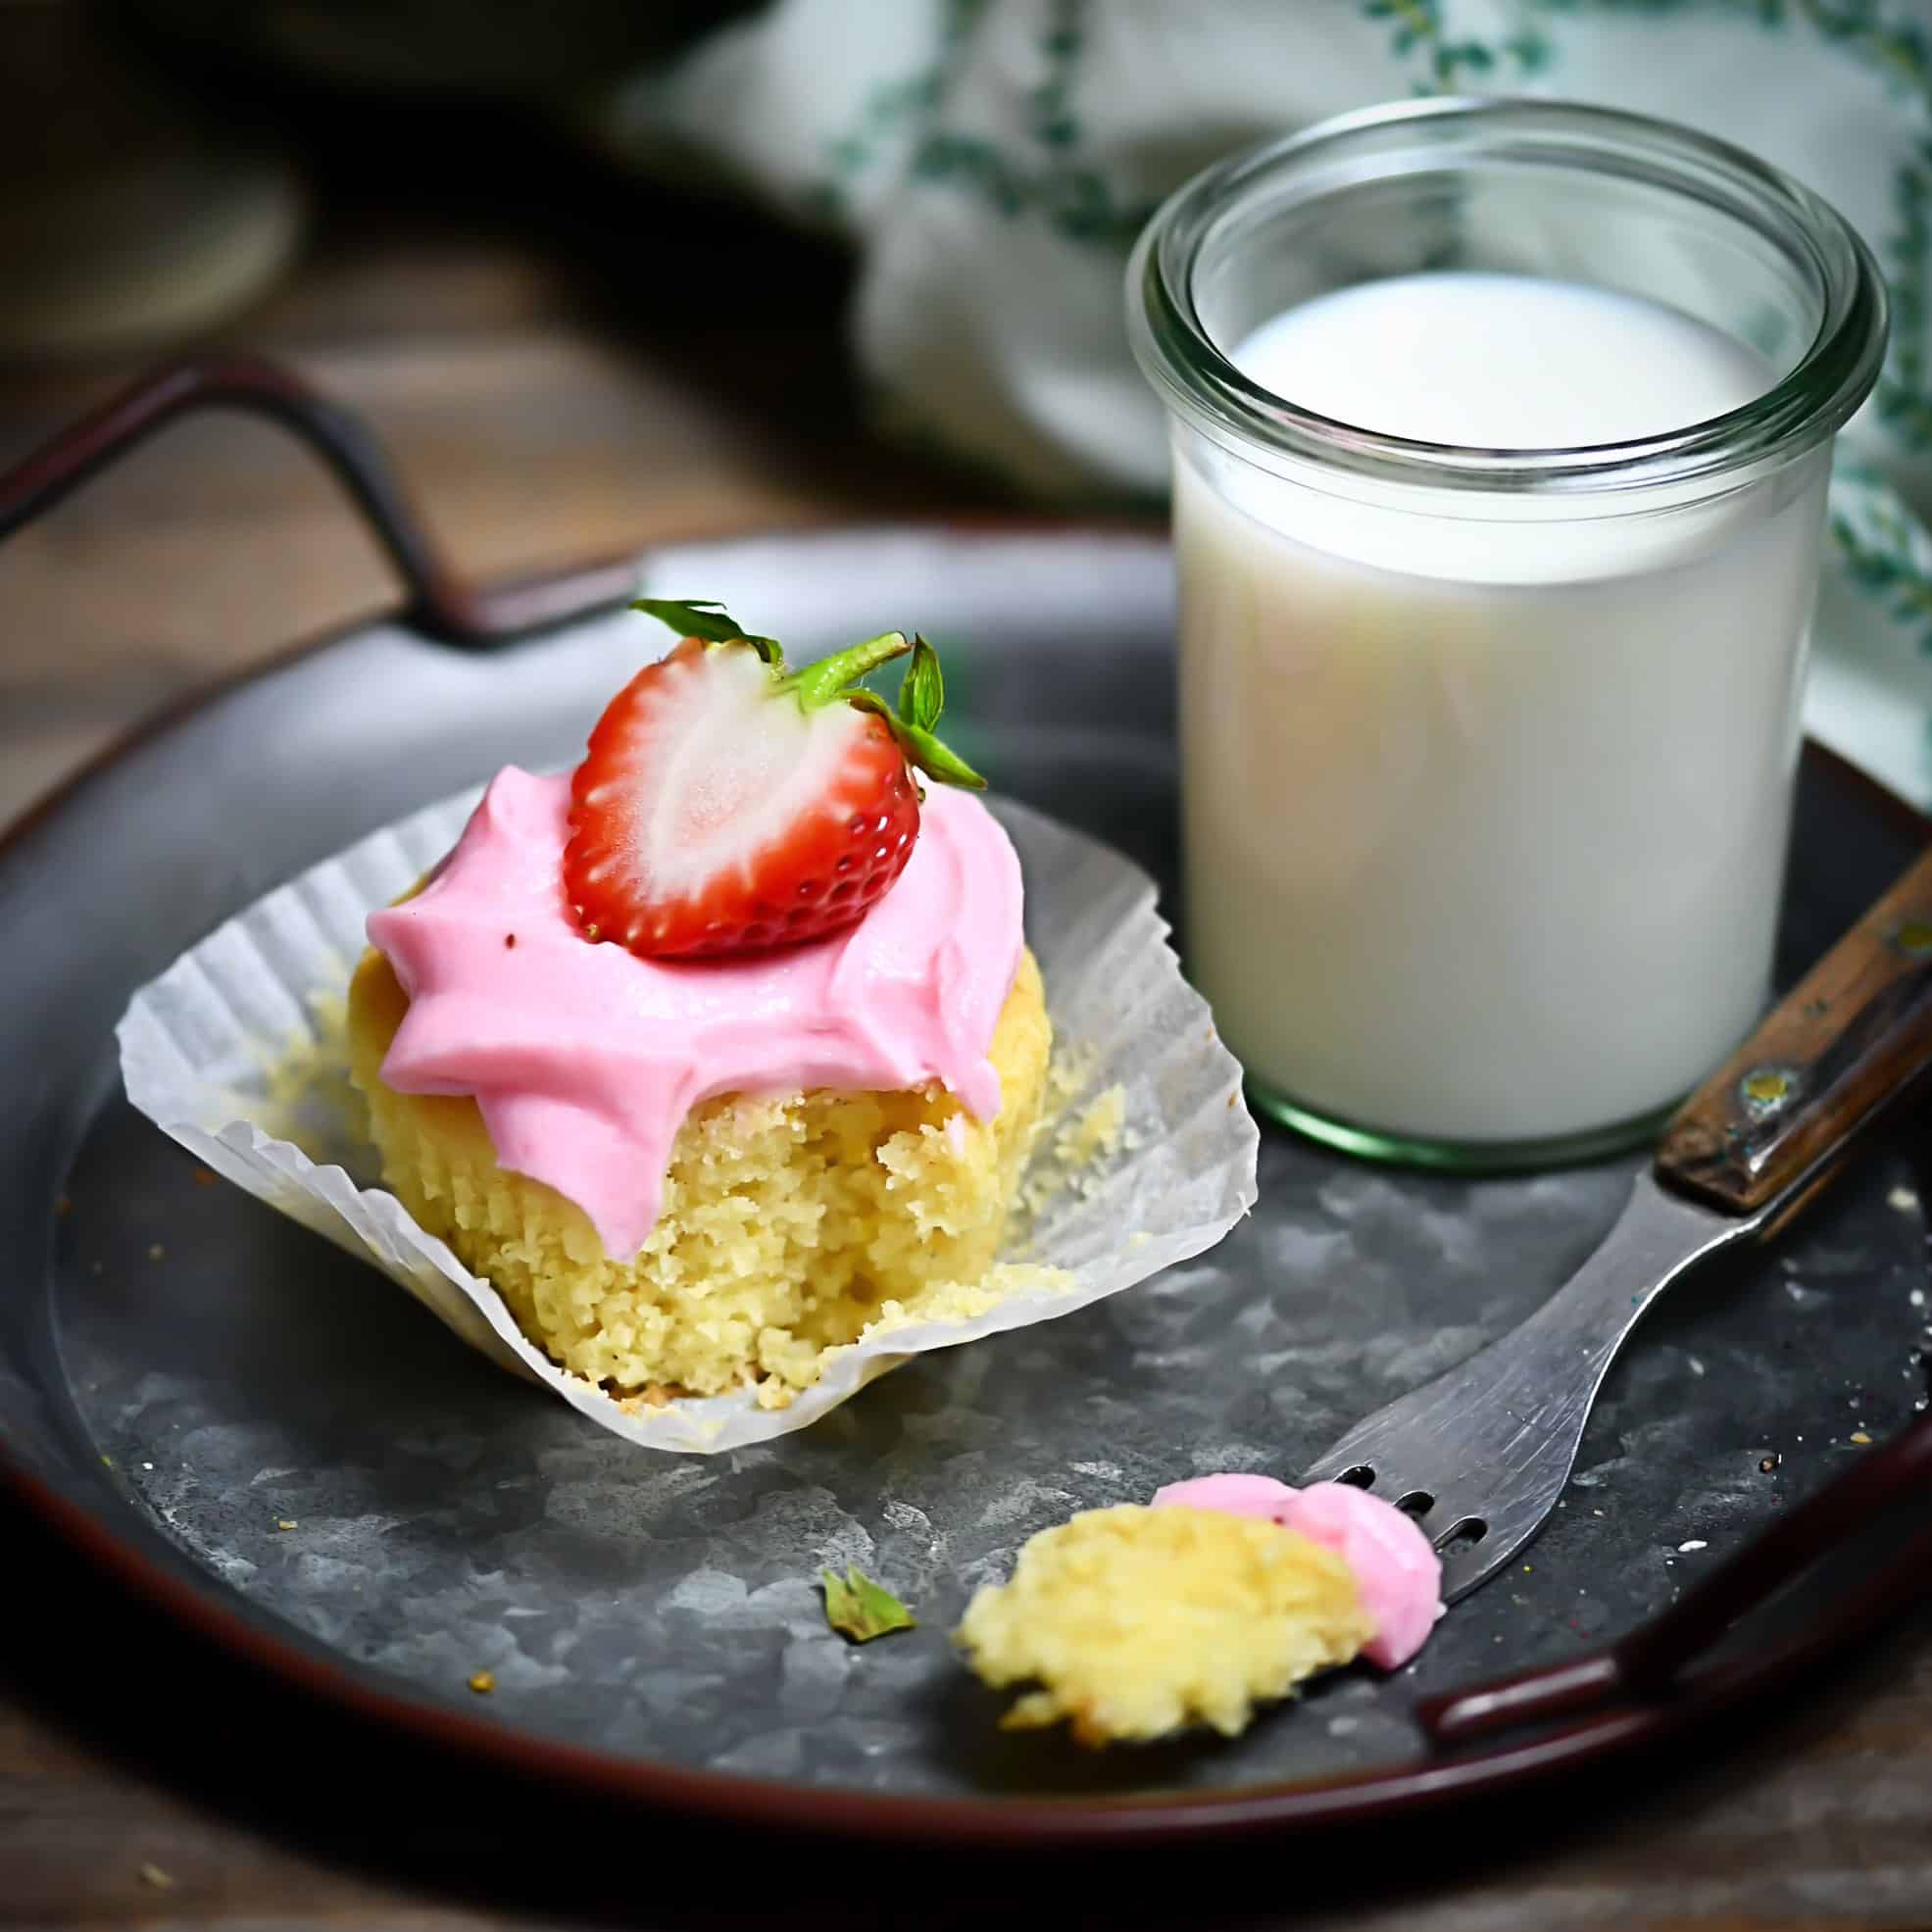 Sugarless Grain-Free Strawberry Cupcakes with wooden fork